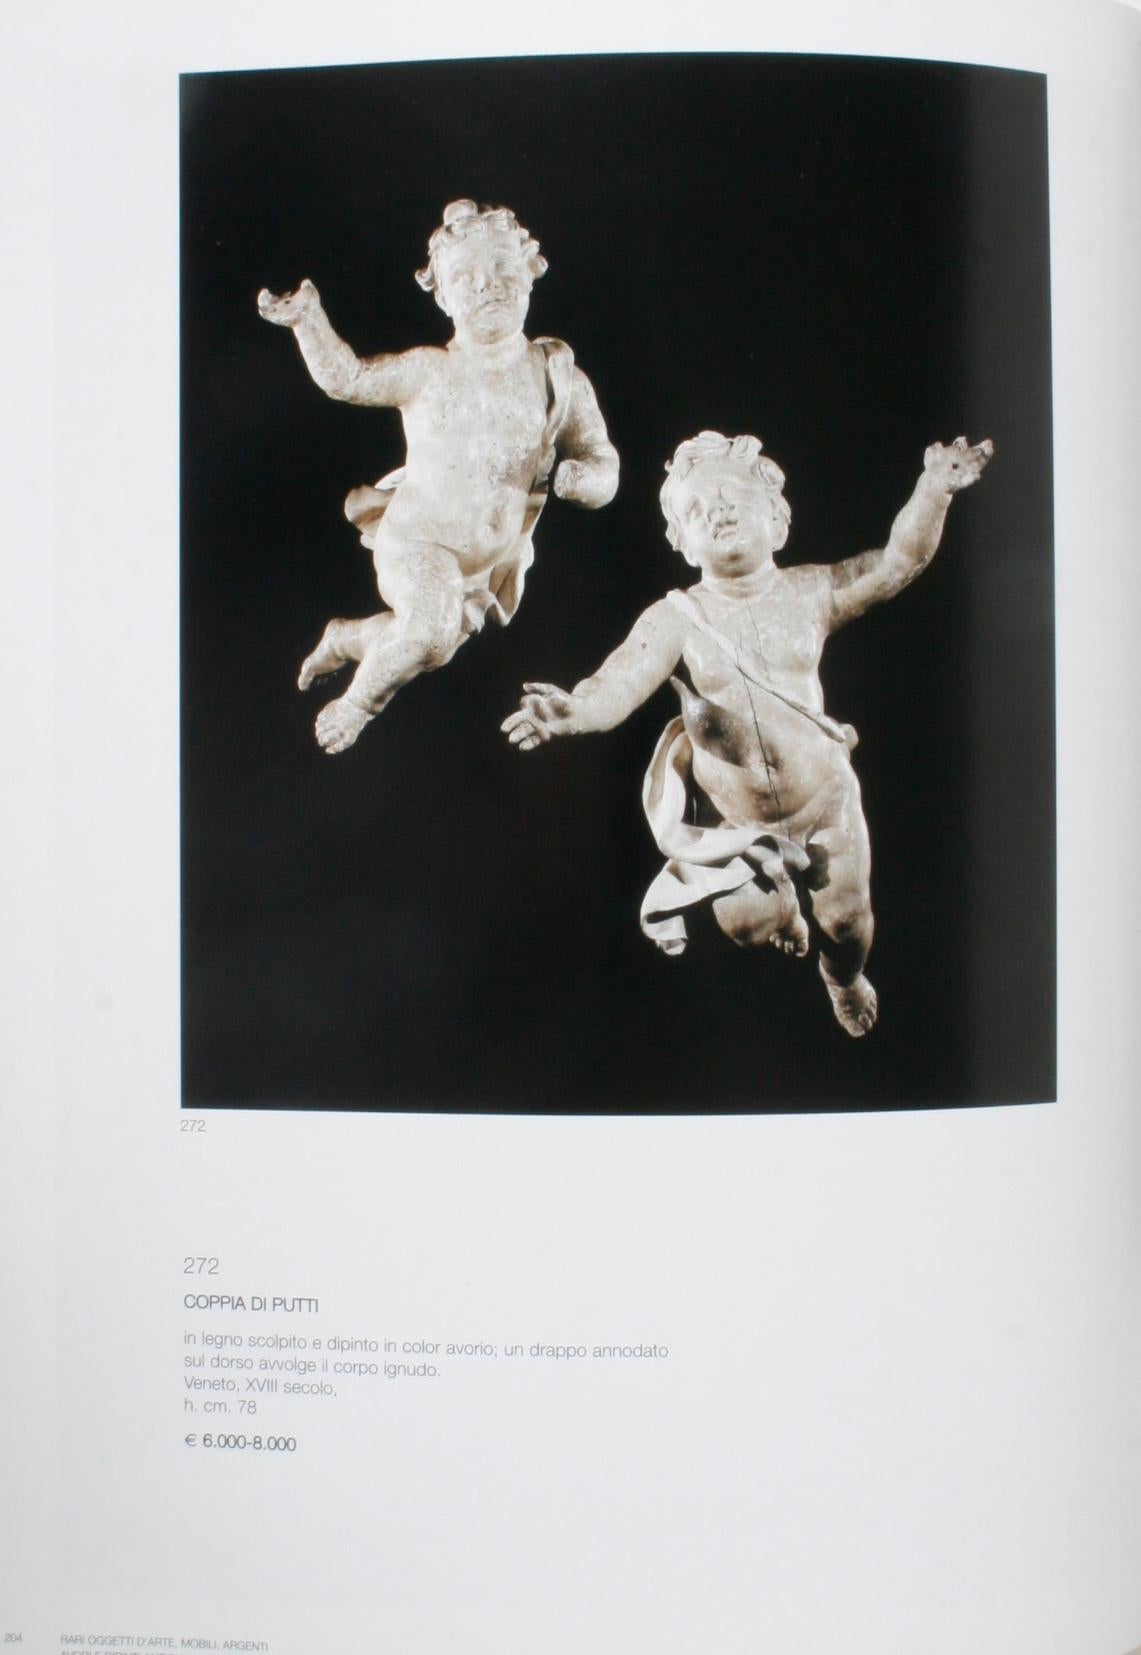 Auction Catalogue of Italian Fine Art, Silver, Ivory, and Venetian Objects, 2006 For Sale 13